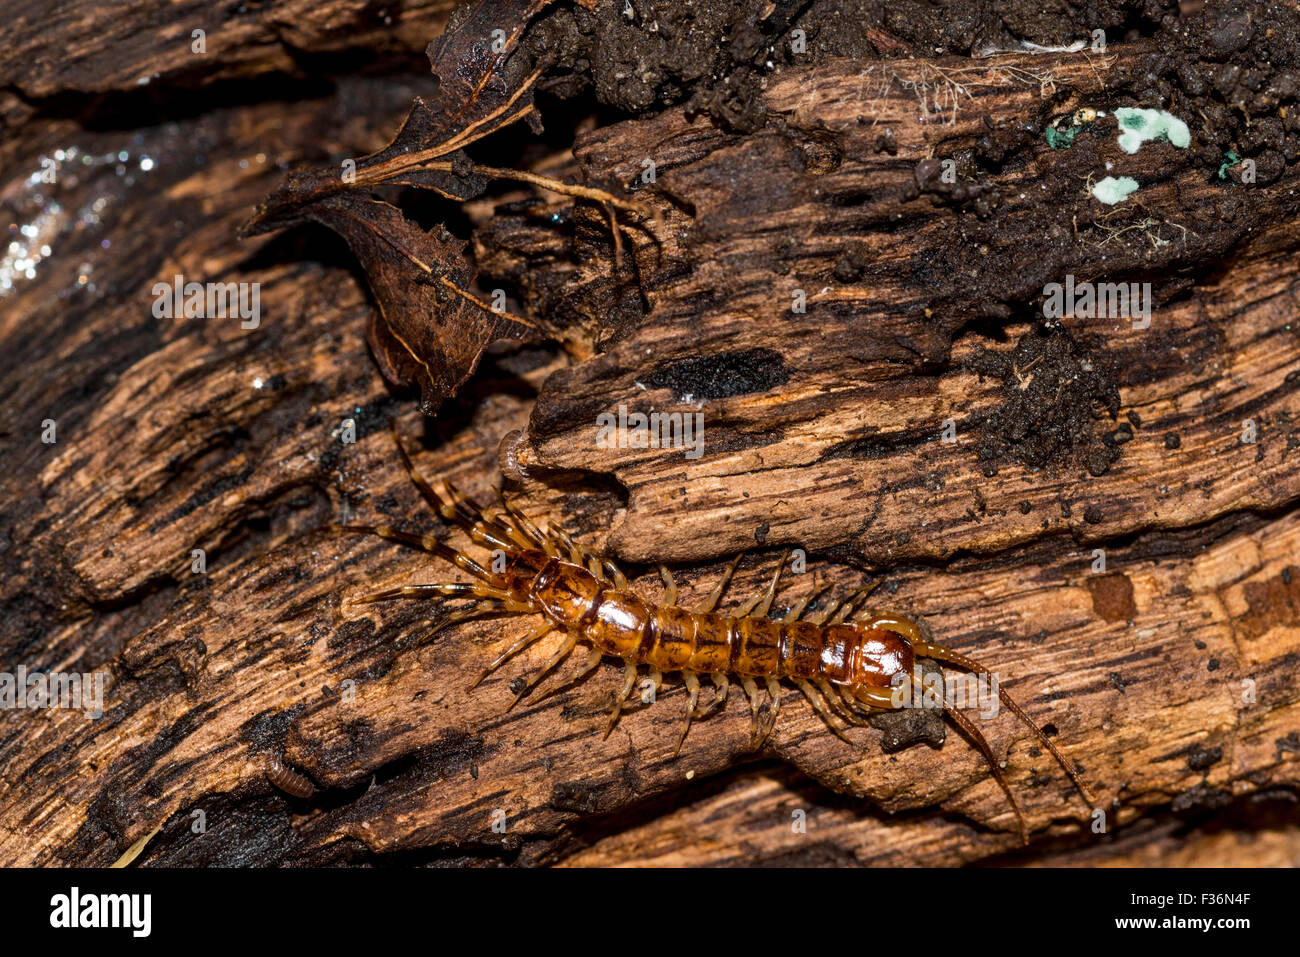 A shot of a centipede found under a log in Pulborough, West Sussex Stock Photo